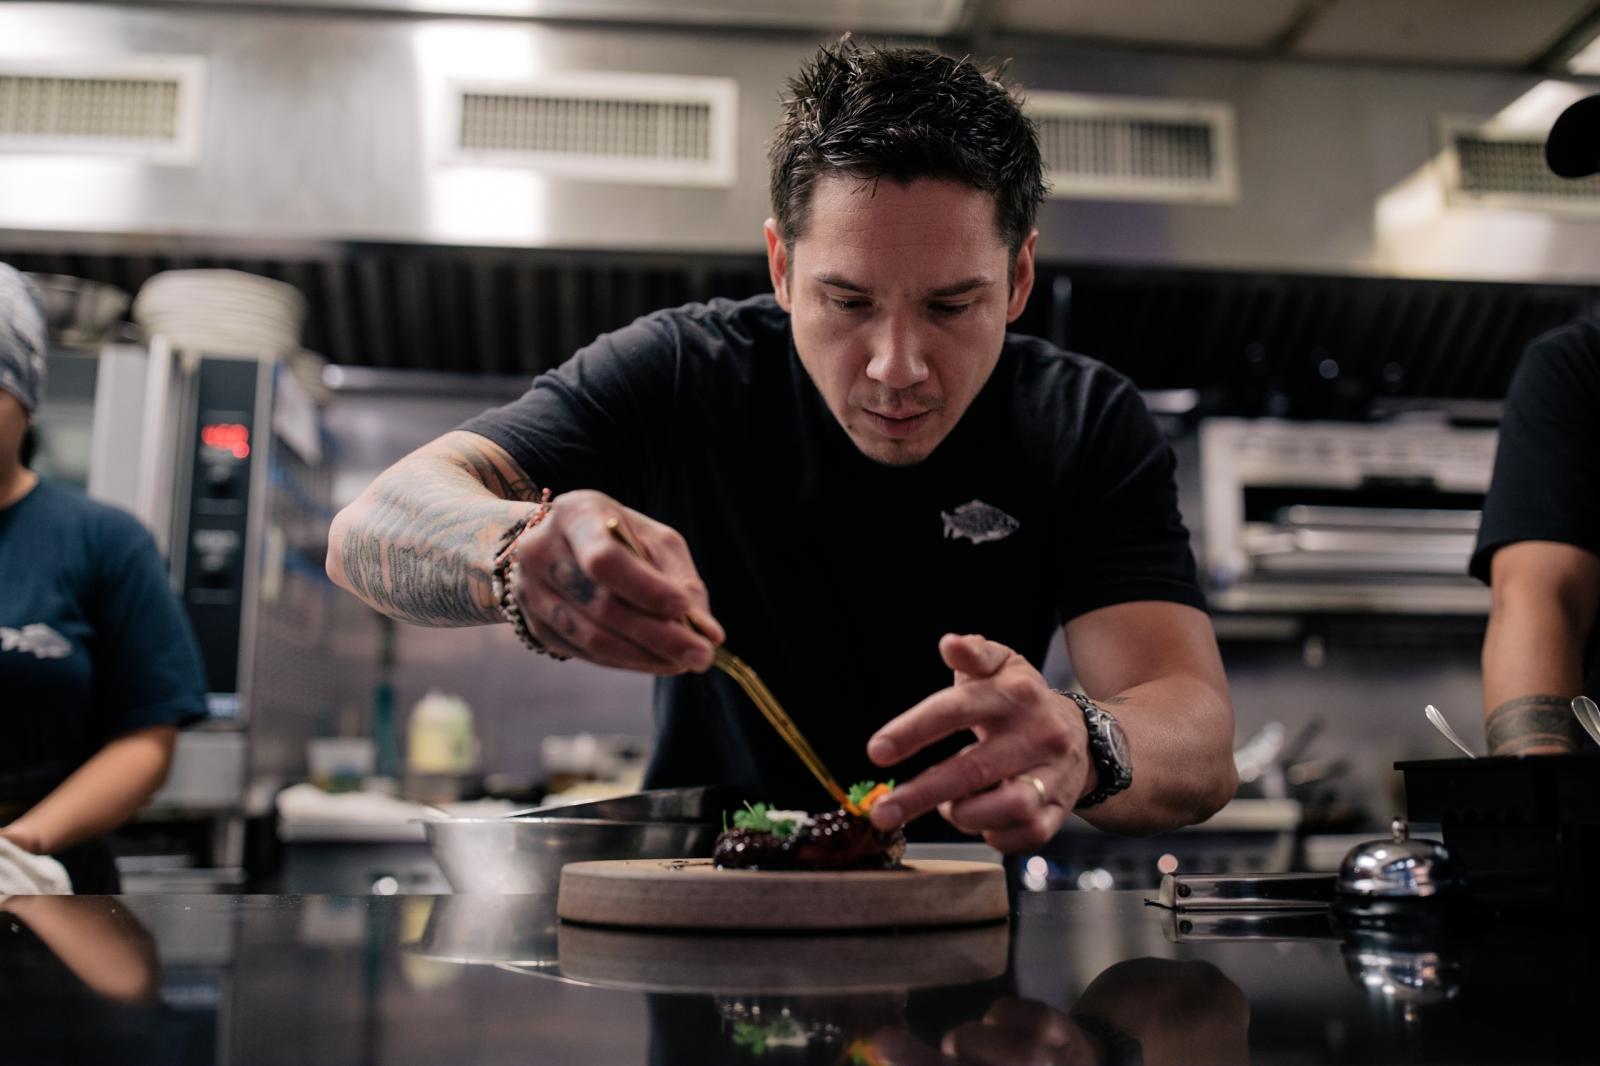  Chef Jose Luis Chavez, co-foun...eviche, for The New York Times 